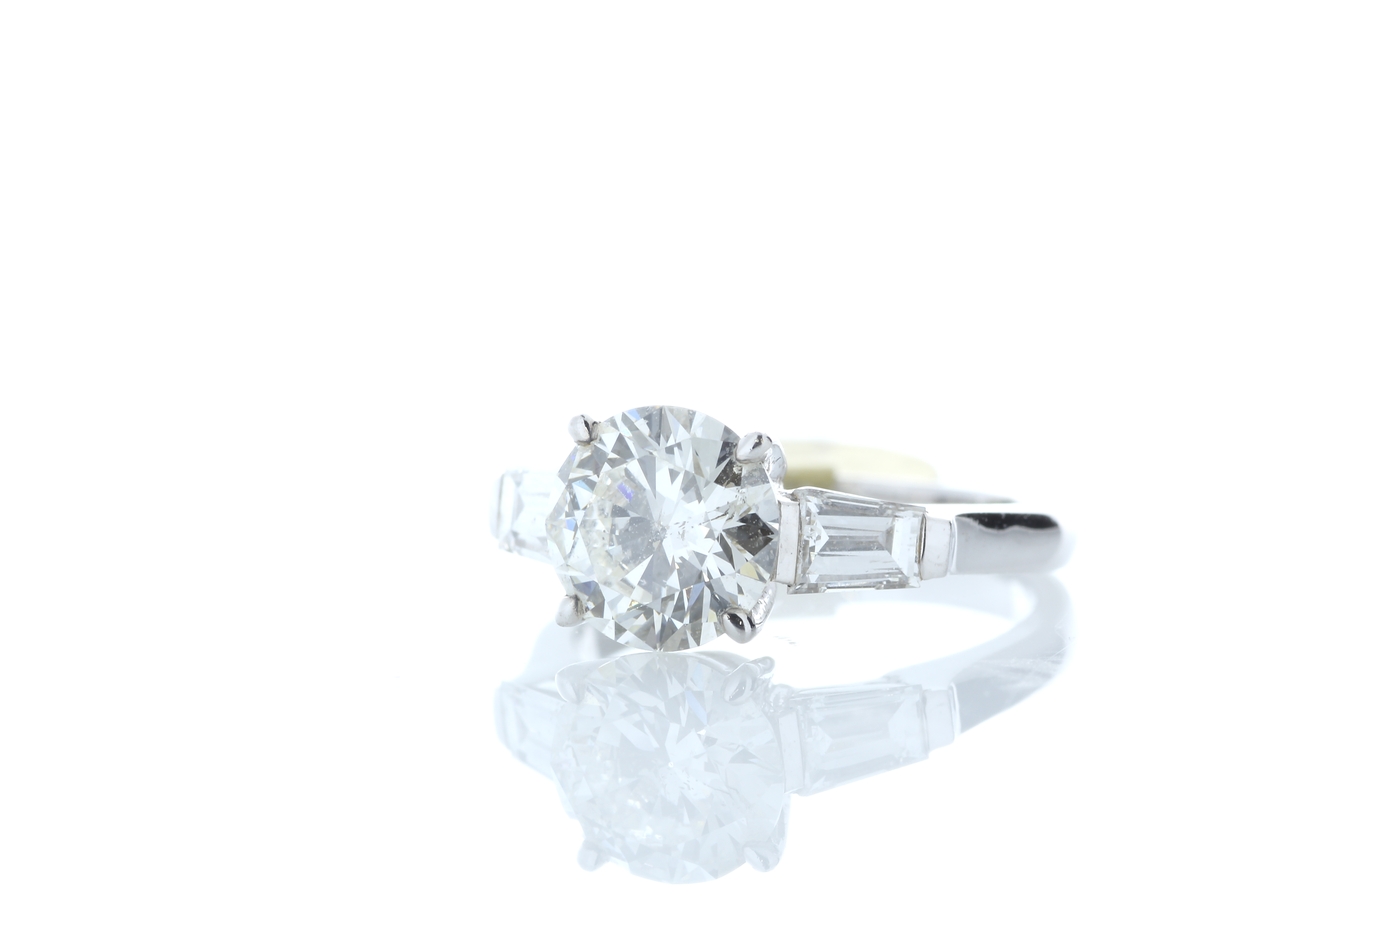 18ct White Gold Baguette Shoulders Diamond Ring 2.20 Carats - Image 2 of 5